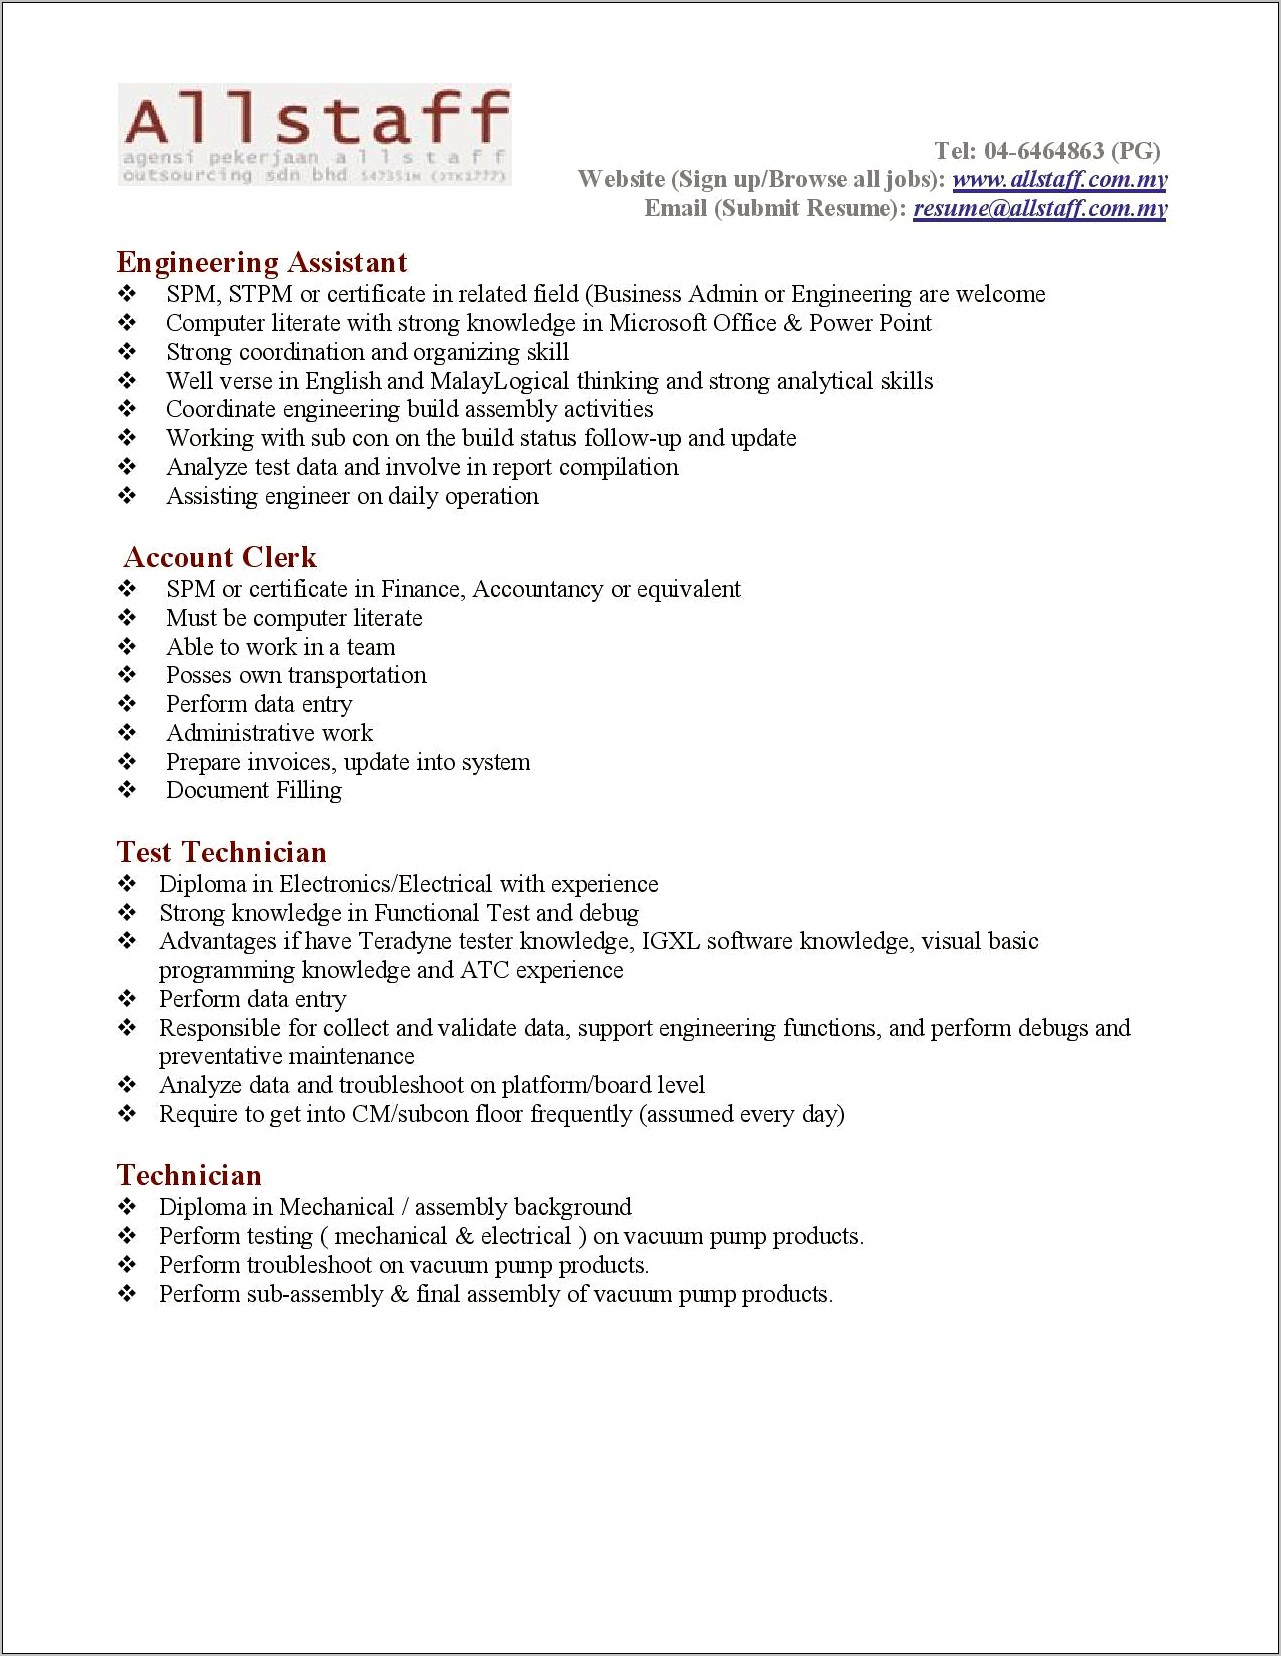 Experience Performing Computer Operating System Maintenance Resume